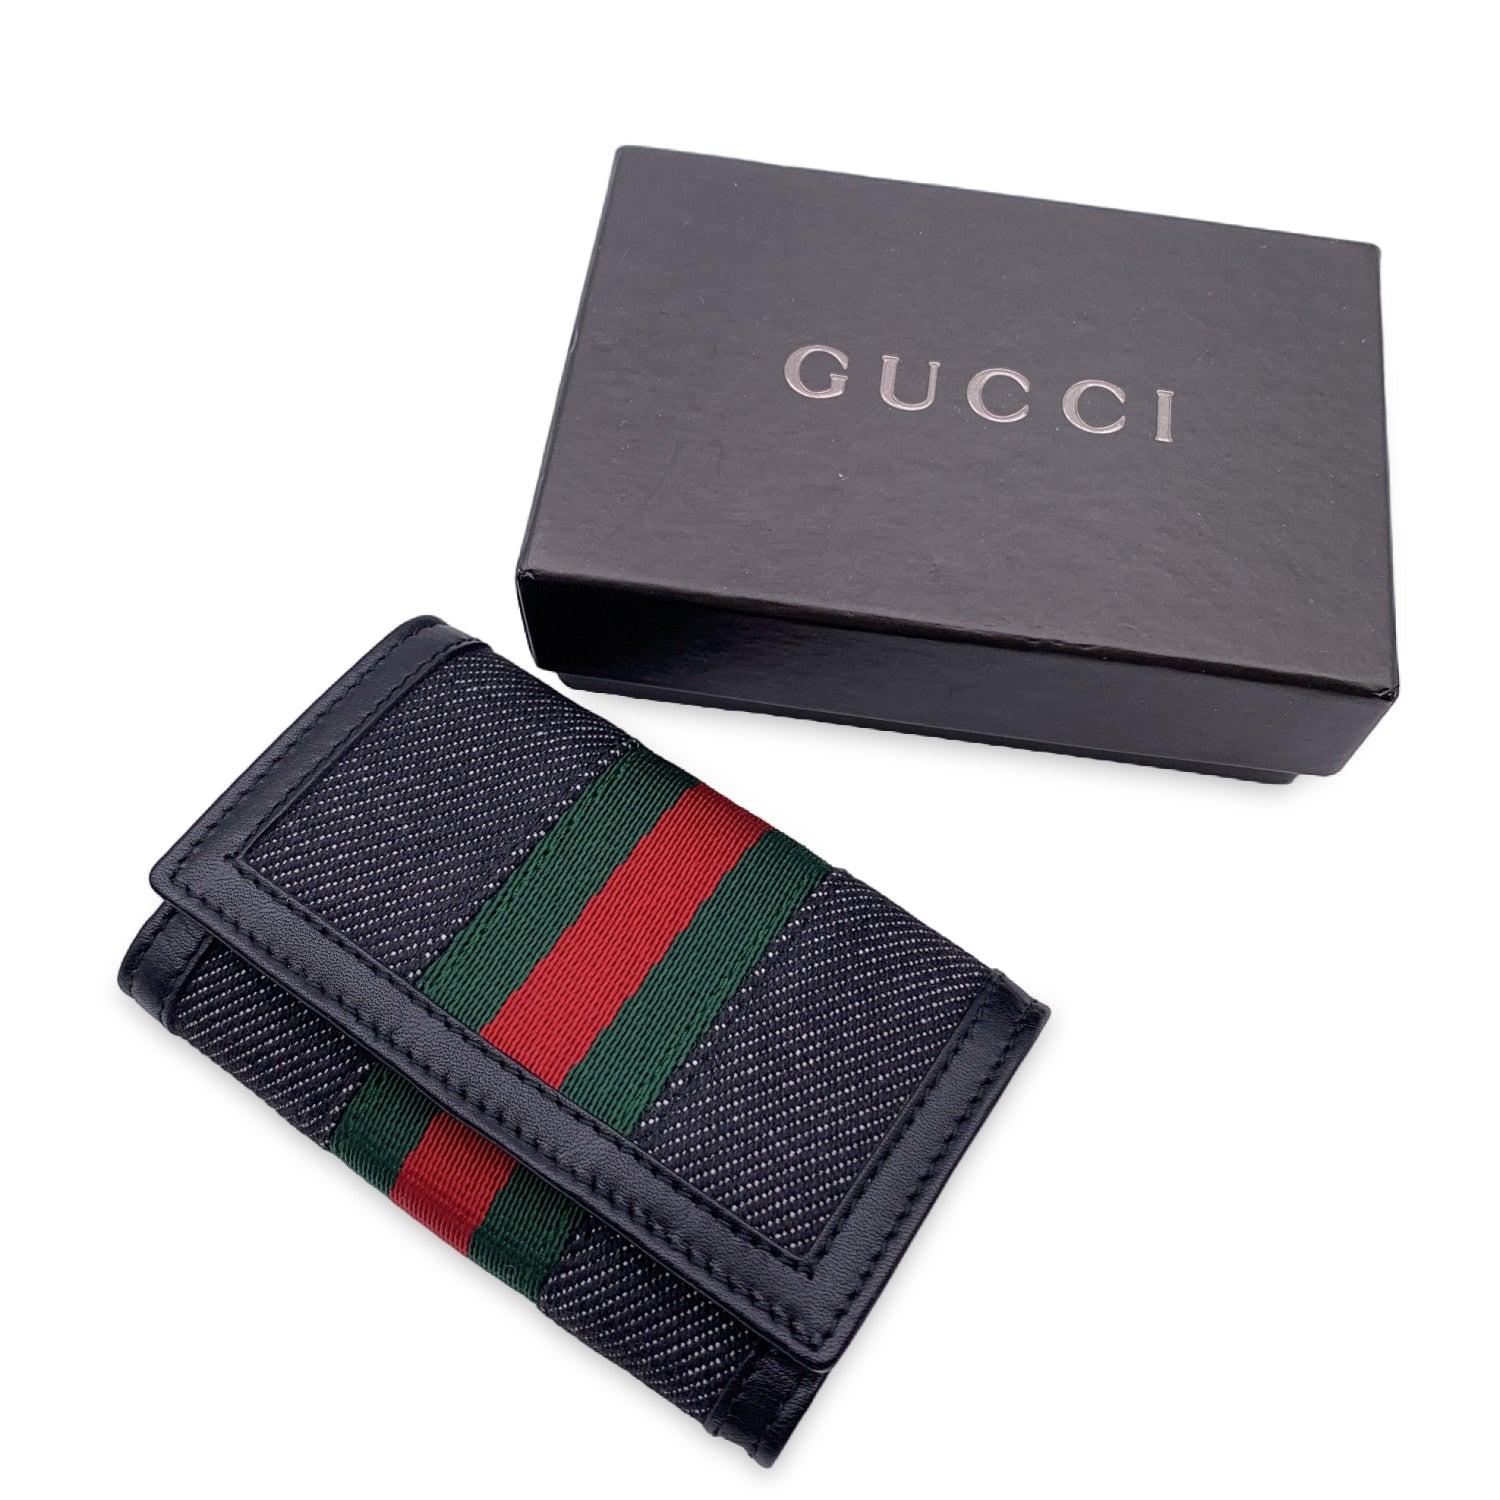 Key case in black denim canvas by Gucci. Green/Red/Green striped detailing. Snap closure on the front. Leather lining. Silver metal hardware. 6 key rings inside. 'Gucci - Made in Italy' embossed inside. Details MATERIAL: Cloth COLOR: Grey MODEL: